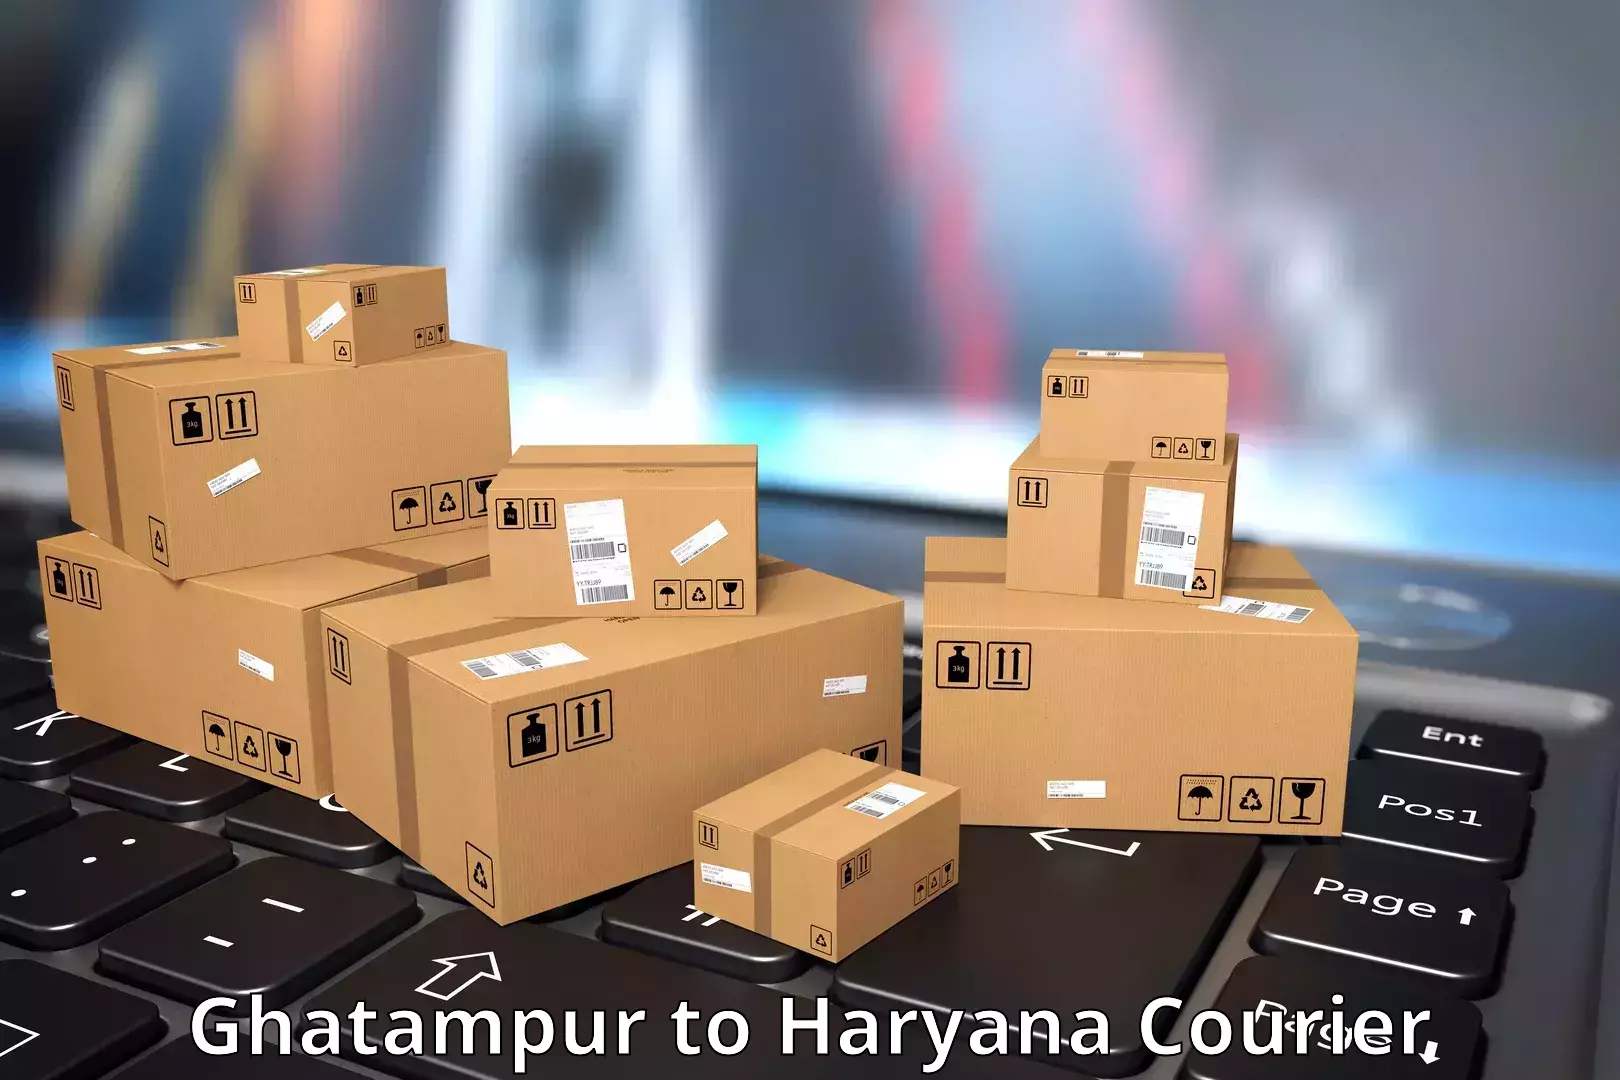 Pharmaceutical courier Ghatampur to Gurgaon